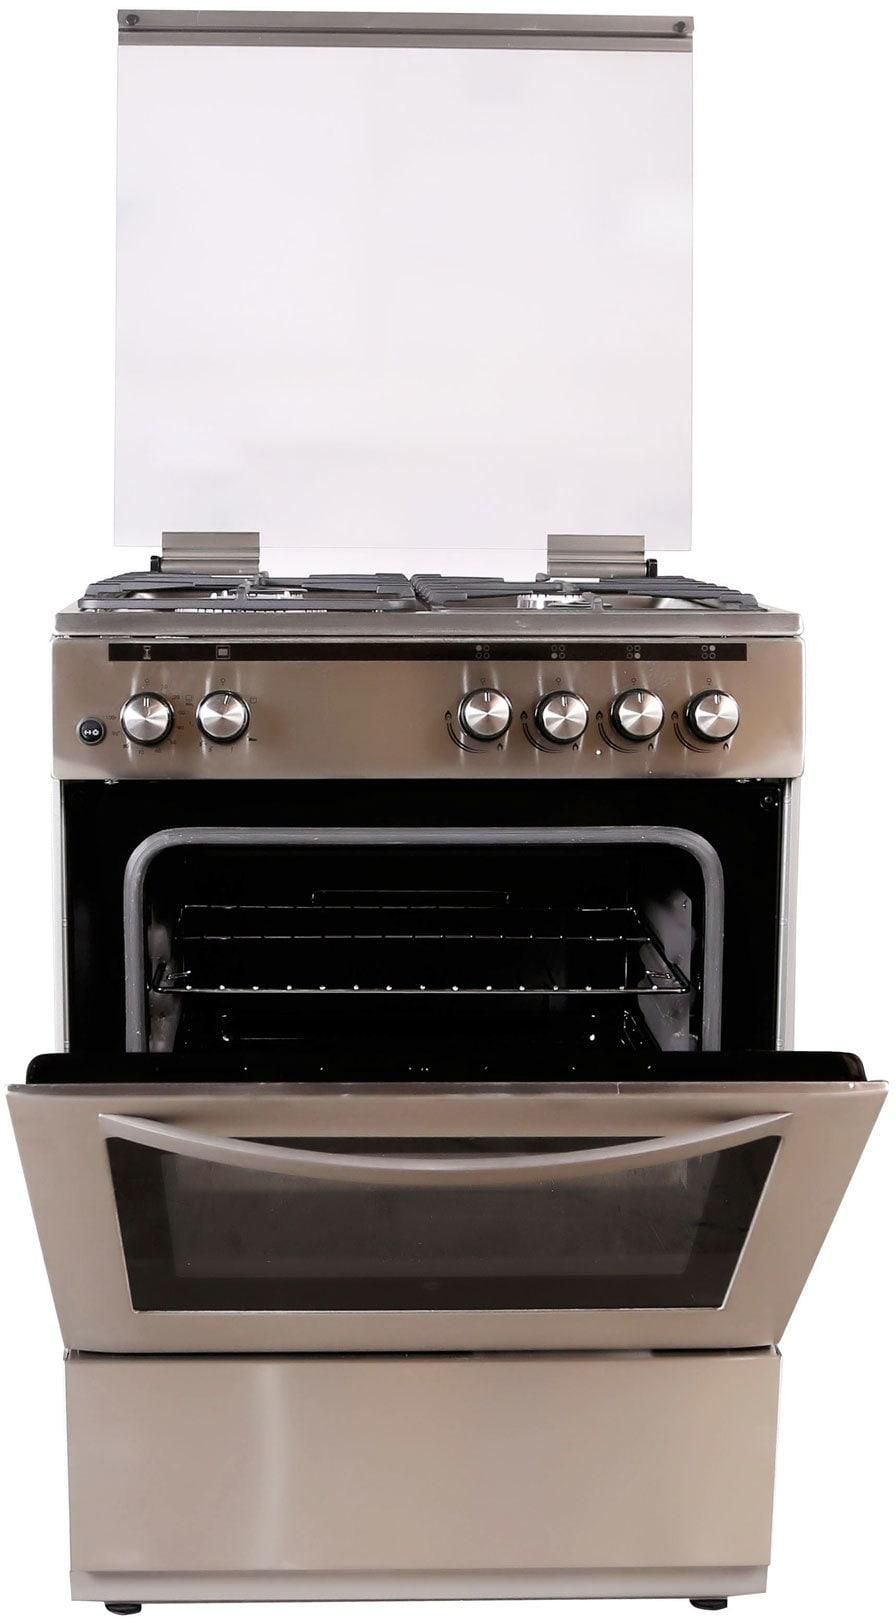 Hoover Free standing 60X60 Cm Gas Cooker with 4 gas burners FGC-66.02S